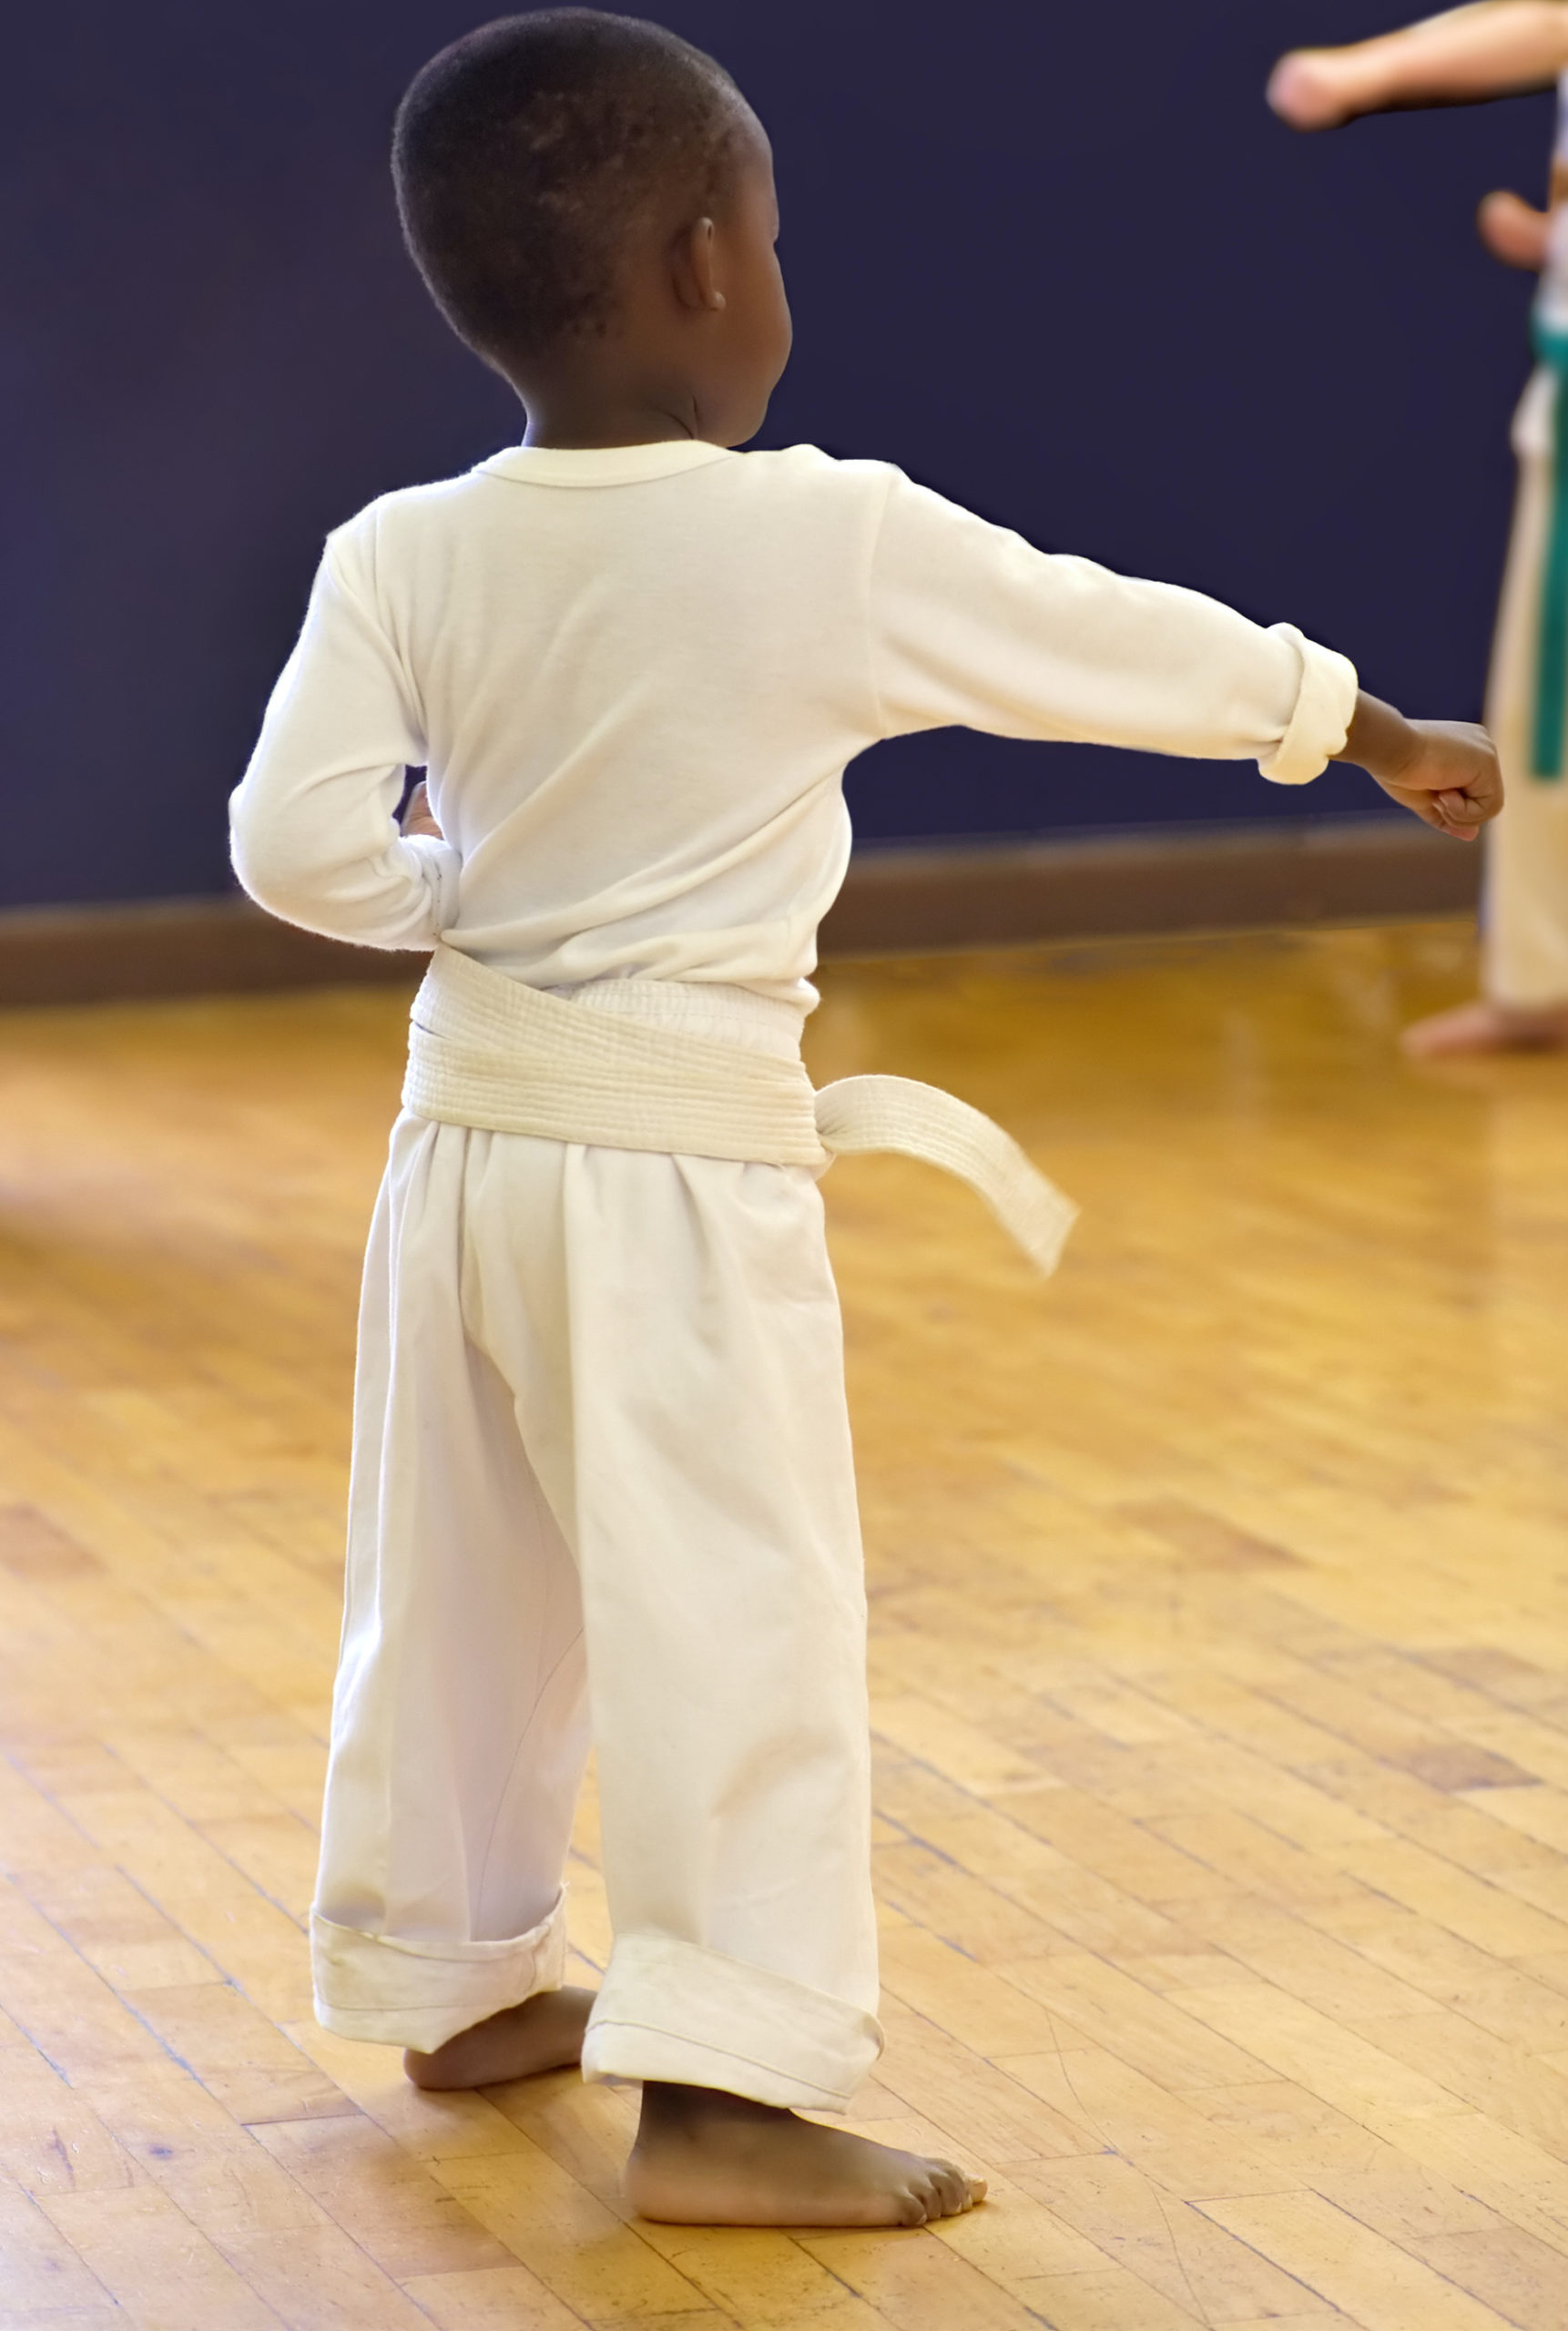 Teach your child self-defense to protect them in the world